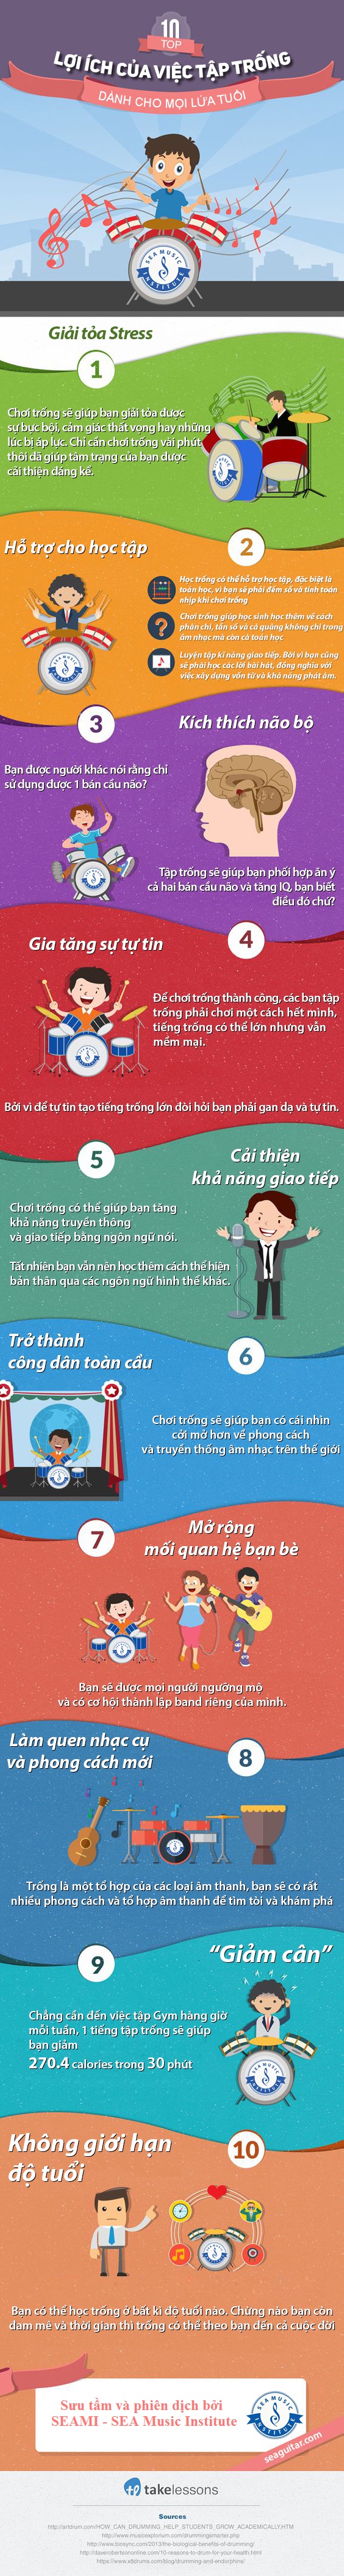 [ Infographic 1 - SEAMI Collection ] 10 LỢI ÍCH KHI TẬP TRỐNG 2